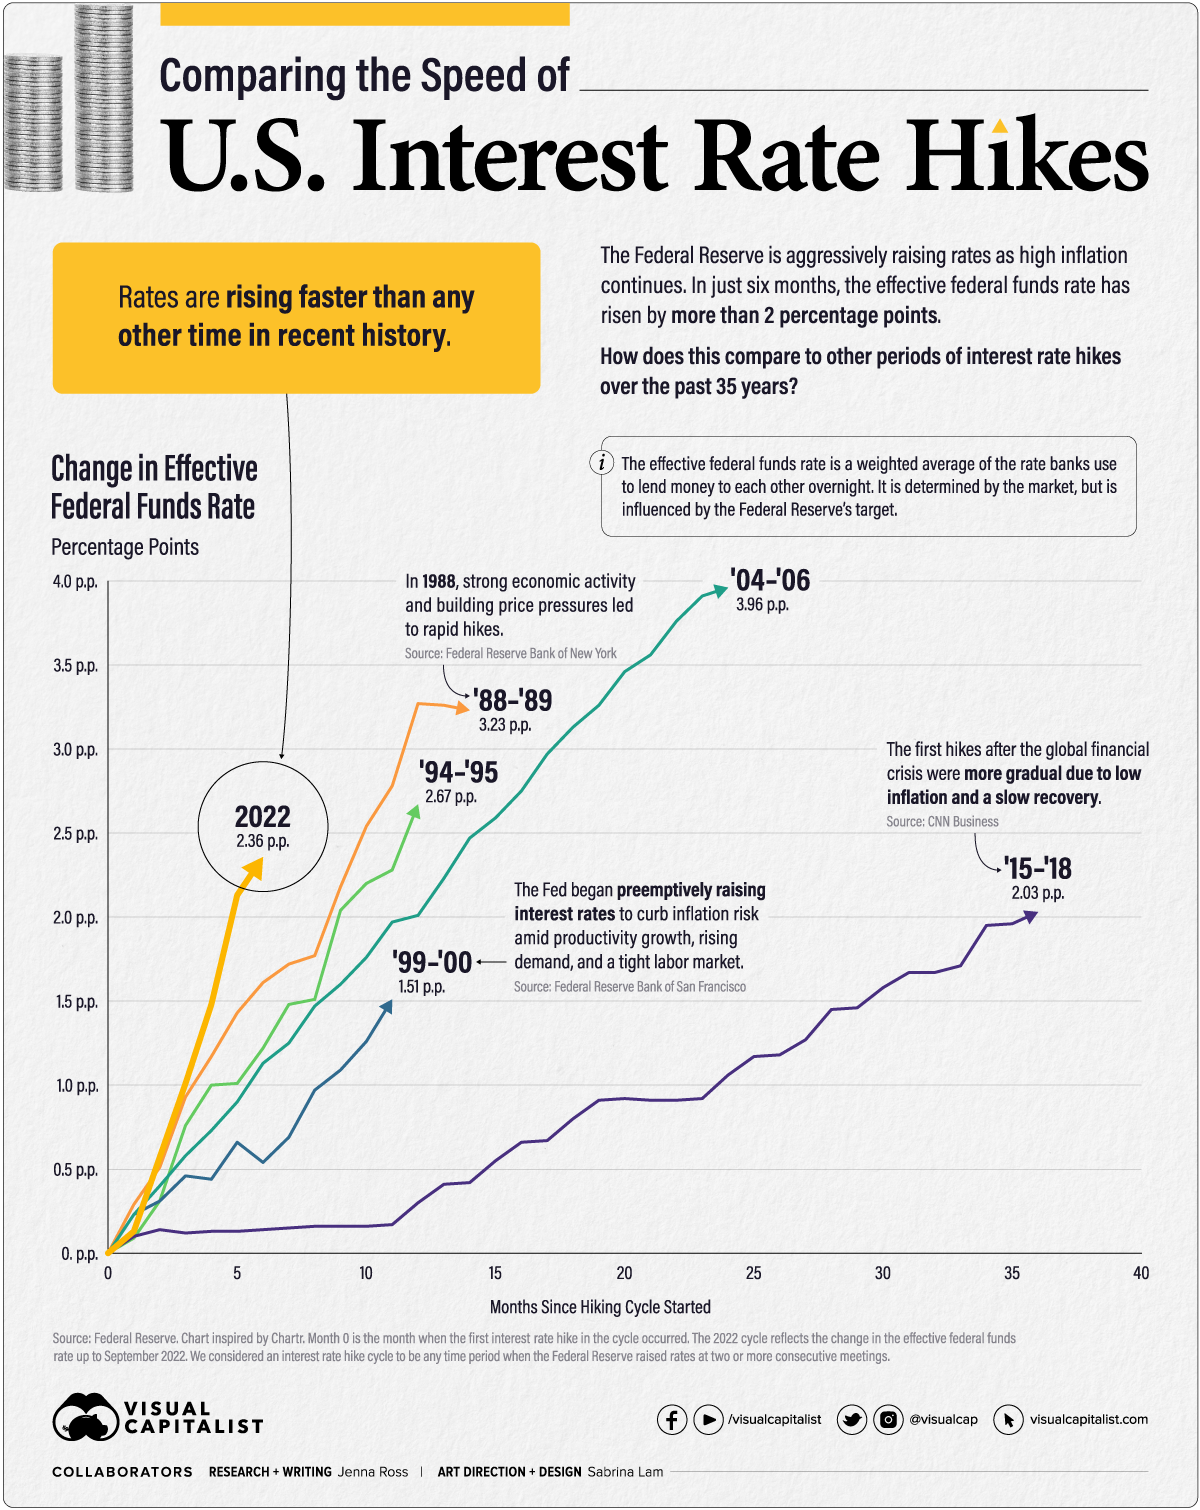 Comparing the Speed of U.S. Interest Rate Hikes (19882022)